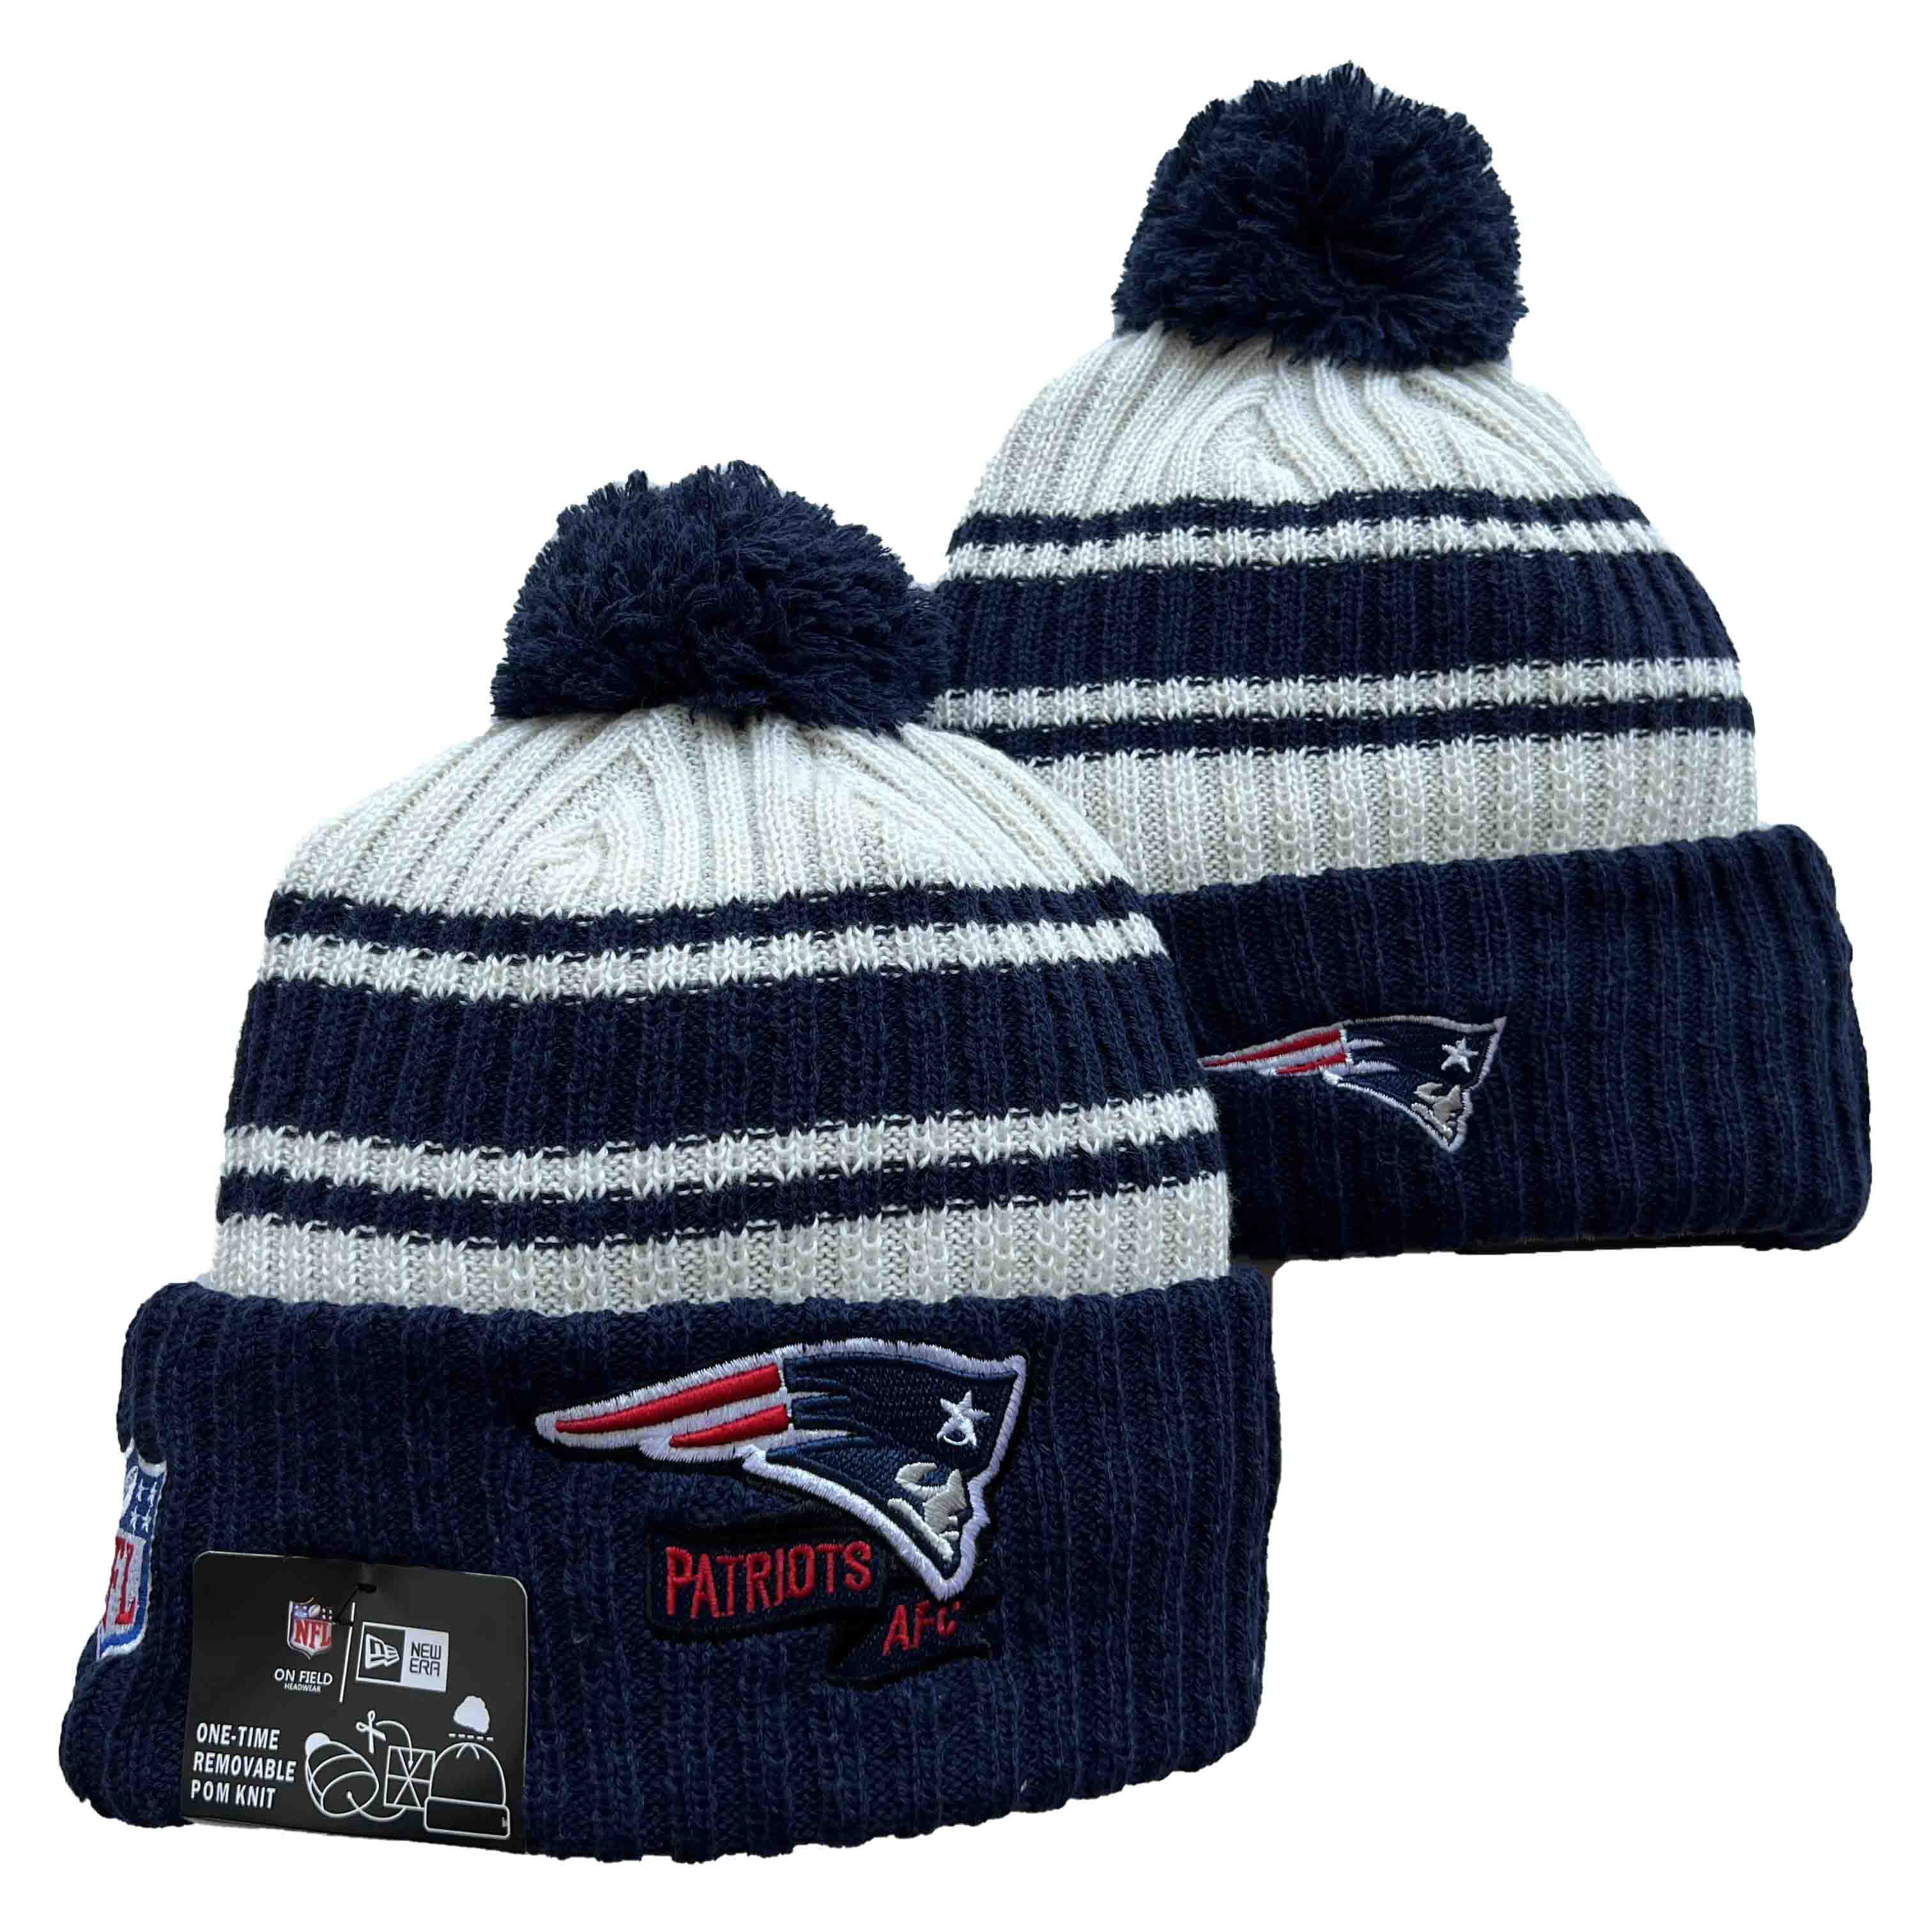 NFL New England Patriots Beanies Knit Hats-YD1253